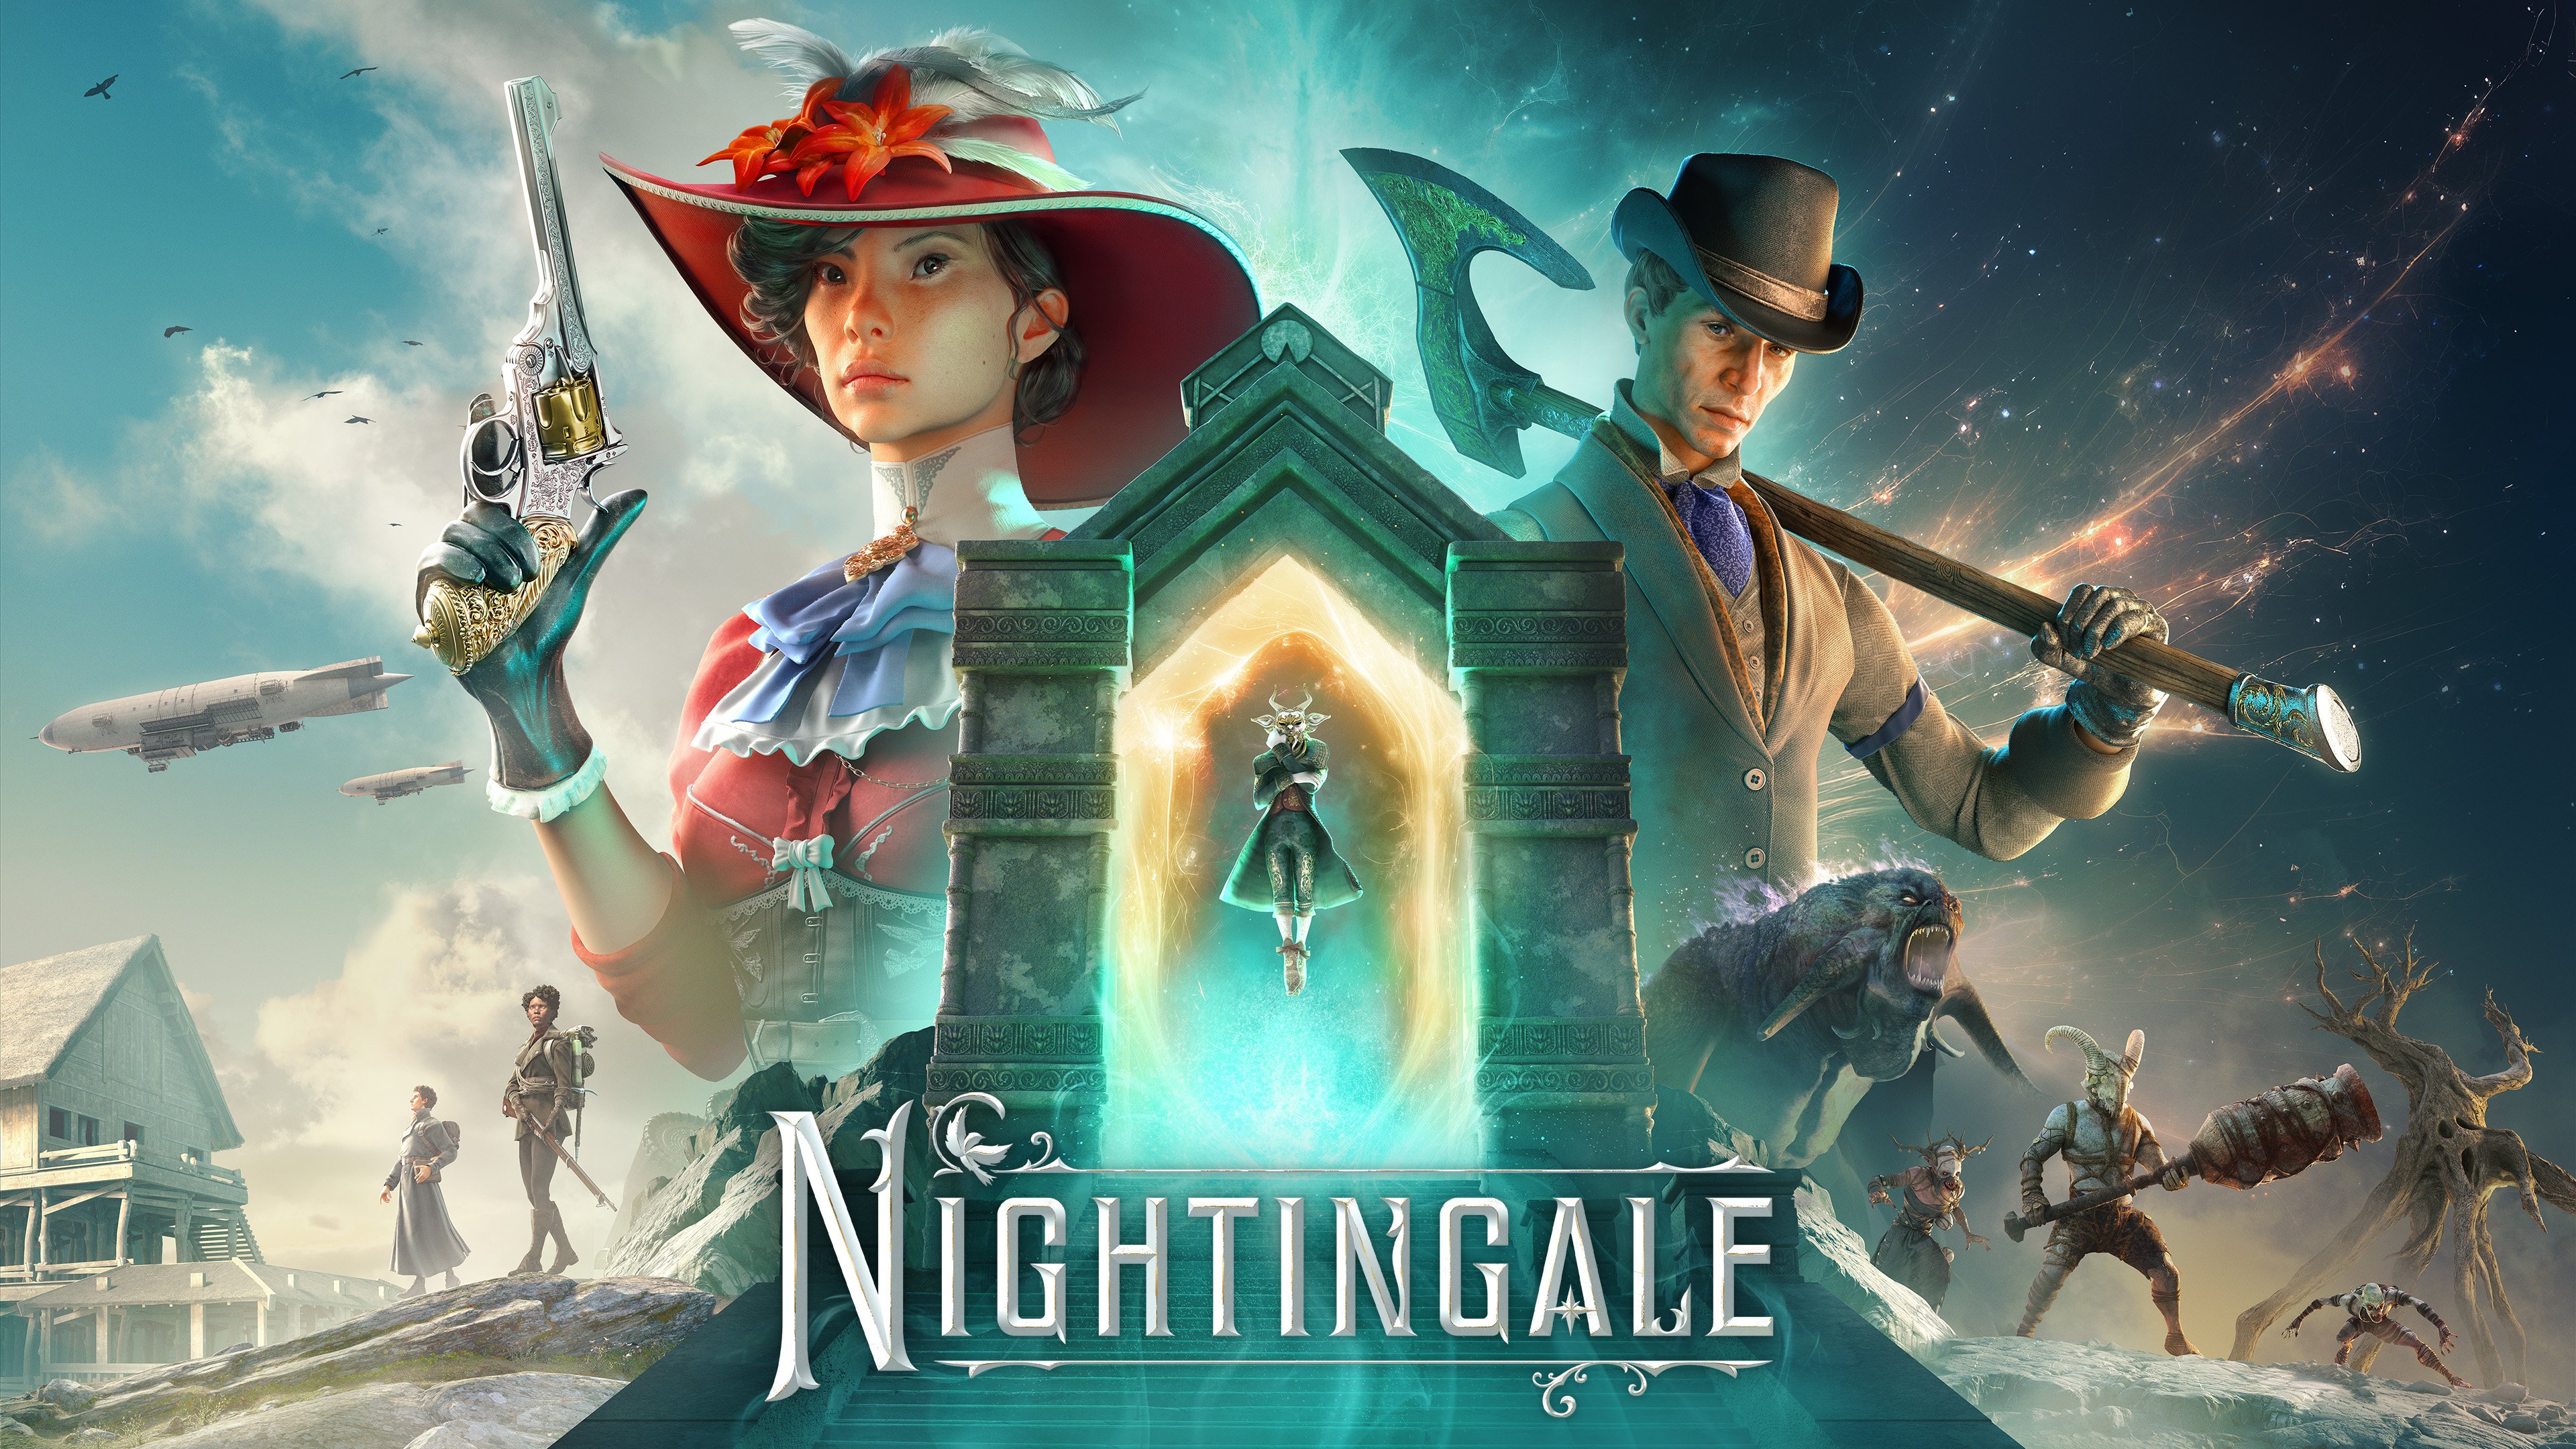 Nightingale's Early Access release moved into next year